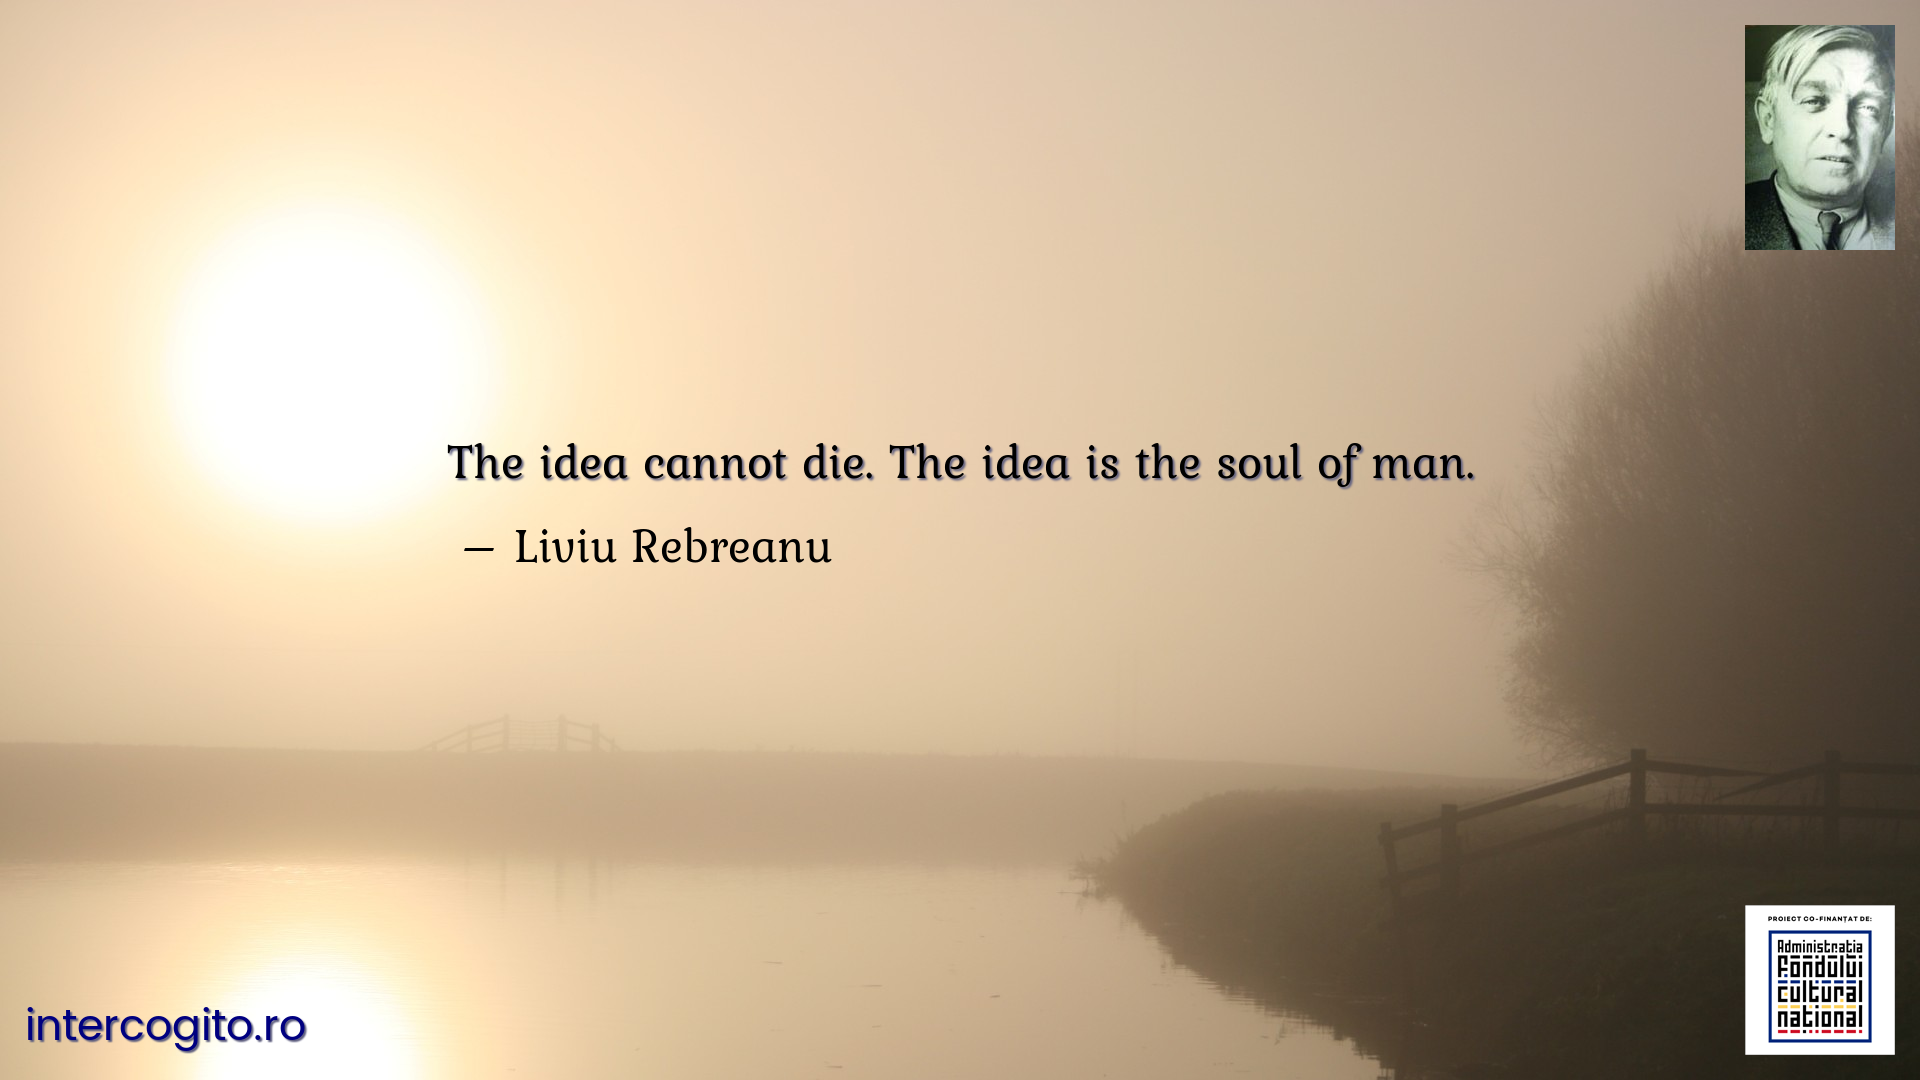 The idea cannot die. The idea is the soul of man.